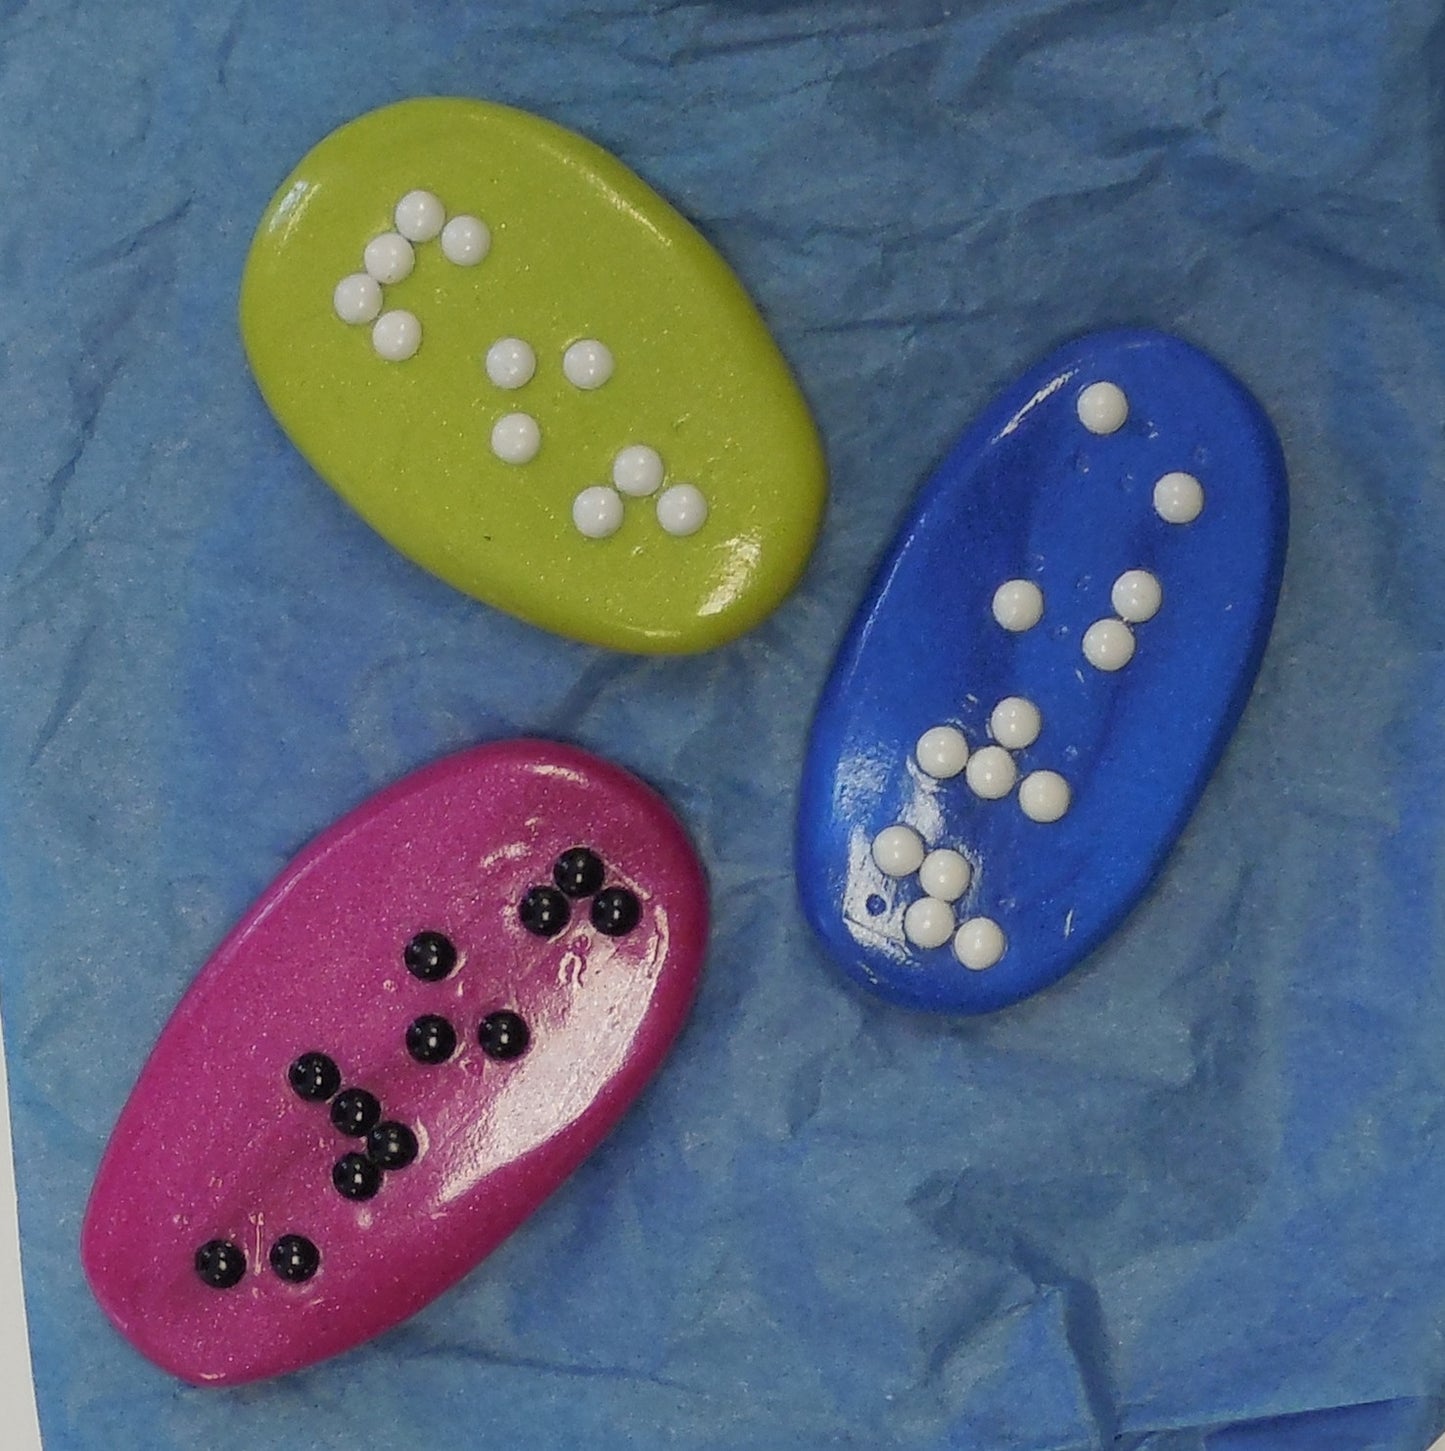 3 flat braille stones in different colors